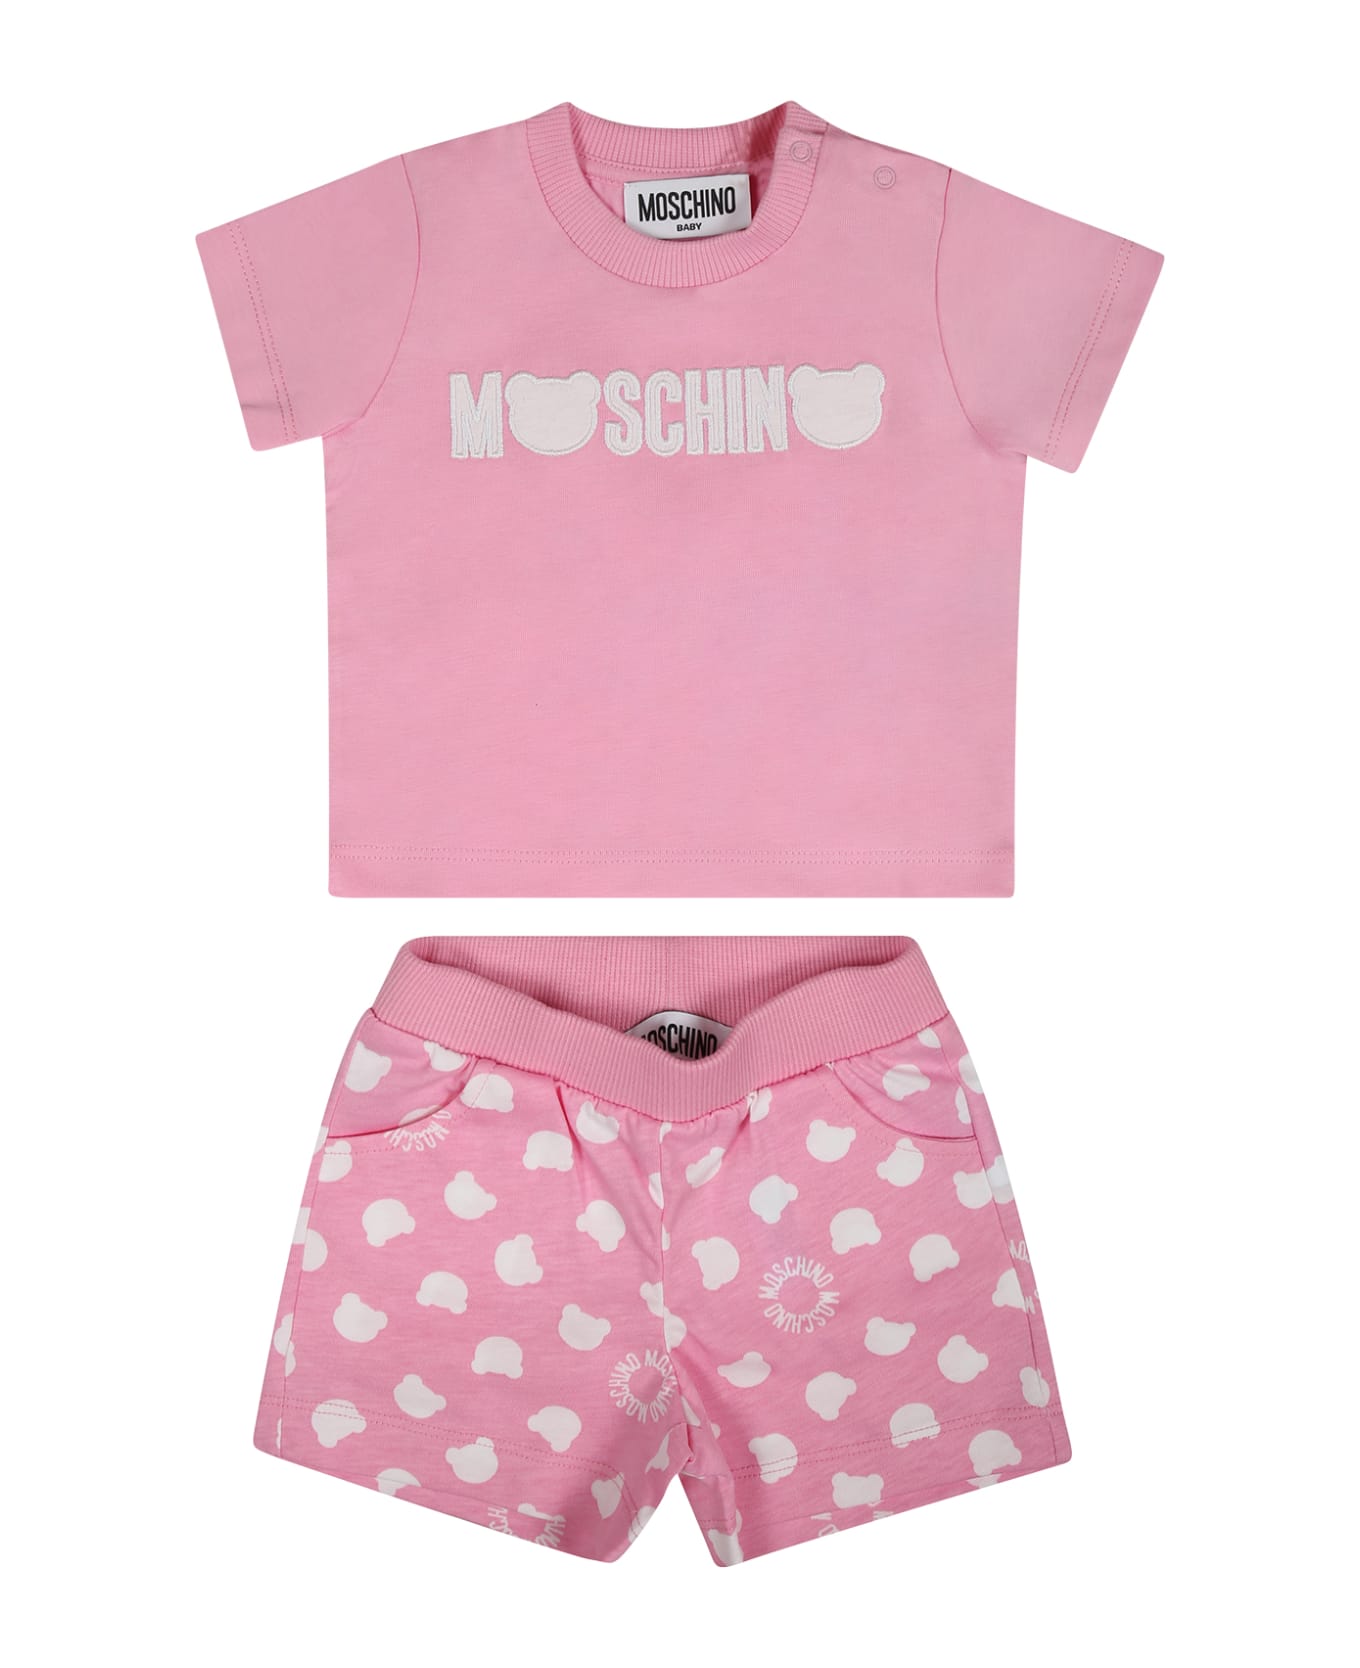 Moschino Pink Outfit For Baby Girl With Logo - Pink